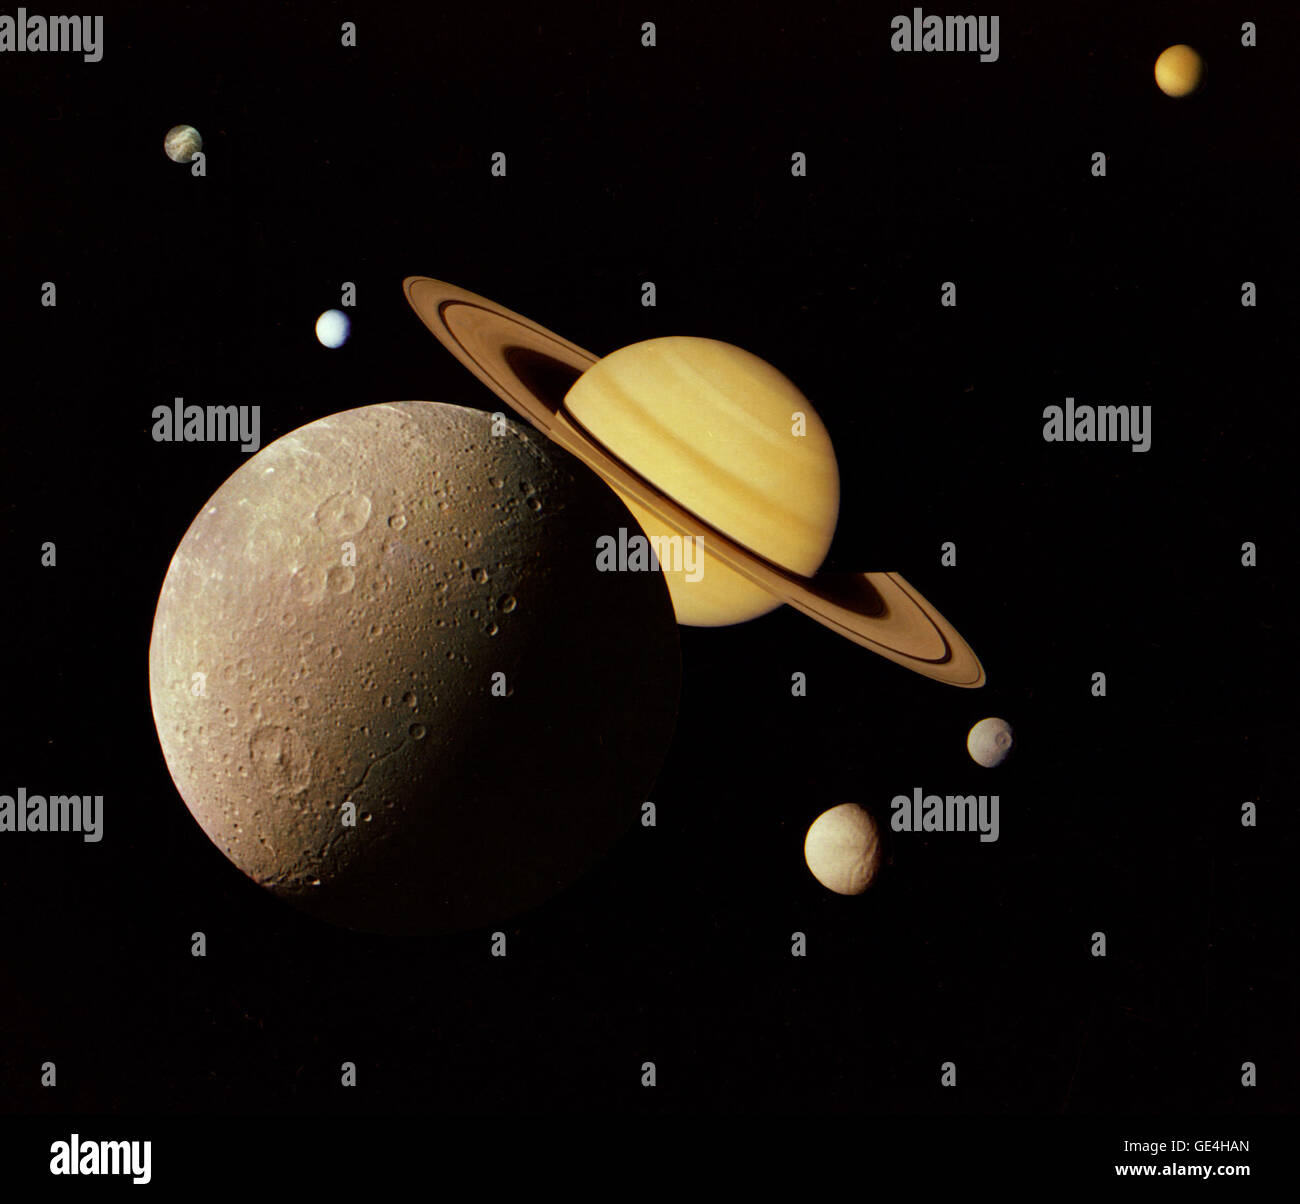 (November 17, 1980) This montage of images of the Saturnian system was prepared from an assemblage of images taken by the Voyager 1 spacecraft during its Saturn encounter in November 1980. This artist's view shows Dione in the forefront, Saturn rising behind, Tethys and Mimas fading in the distance to the right, Enceladus and Rhea off Saturn's rings to the left, and Titan in its distant orbit at the top. The Voyager Project is managed for NASA by the Jet Propulsion Laboratory, Pasadena, California.  Image # : PIA01482 Stock Photo